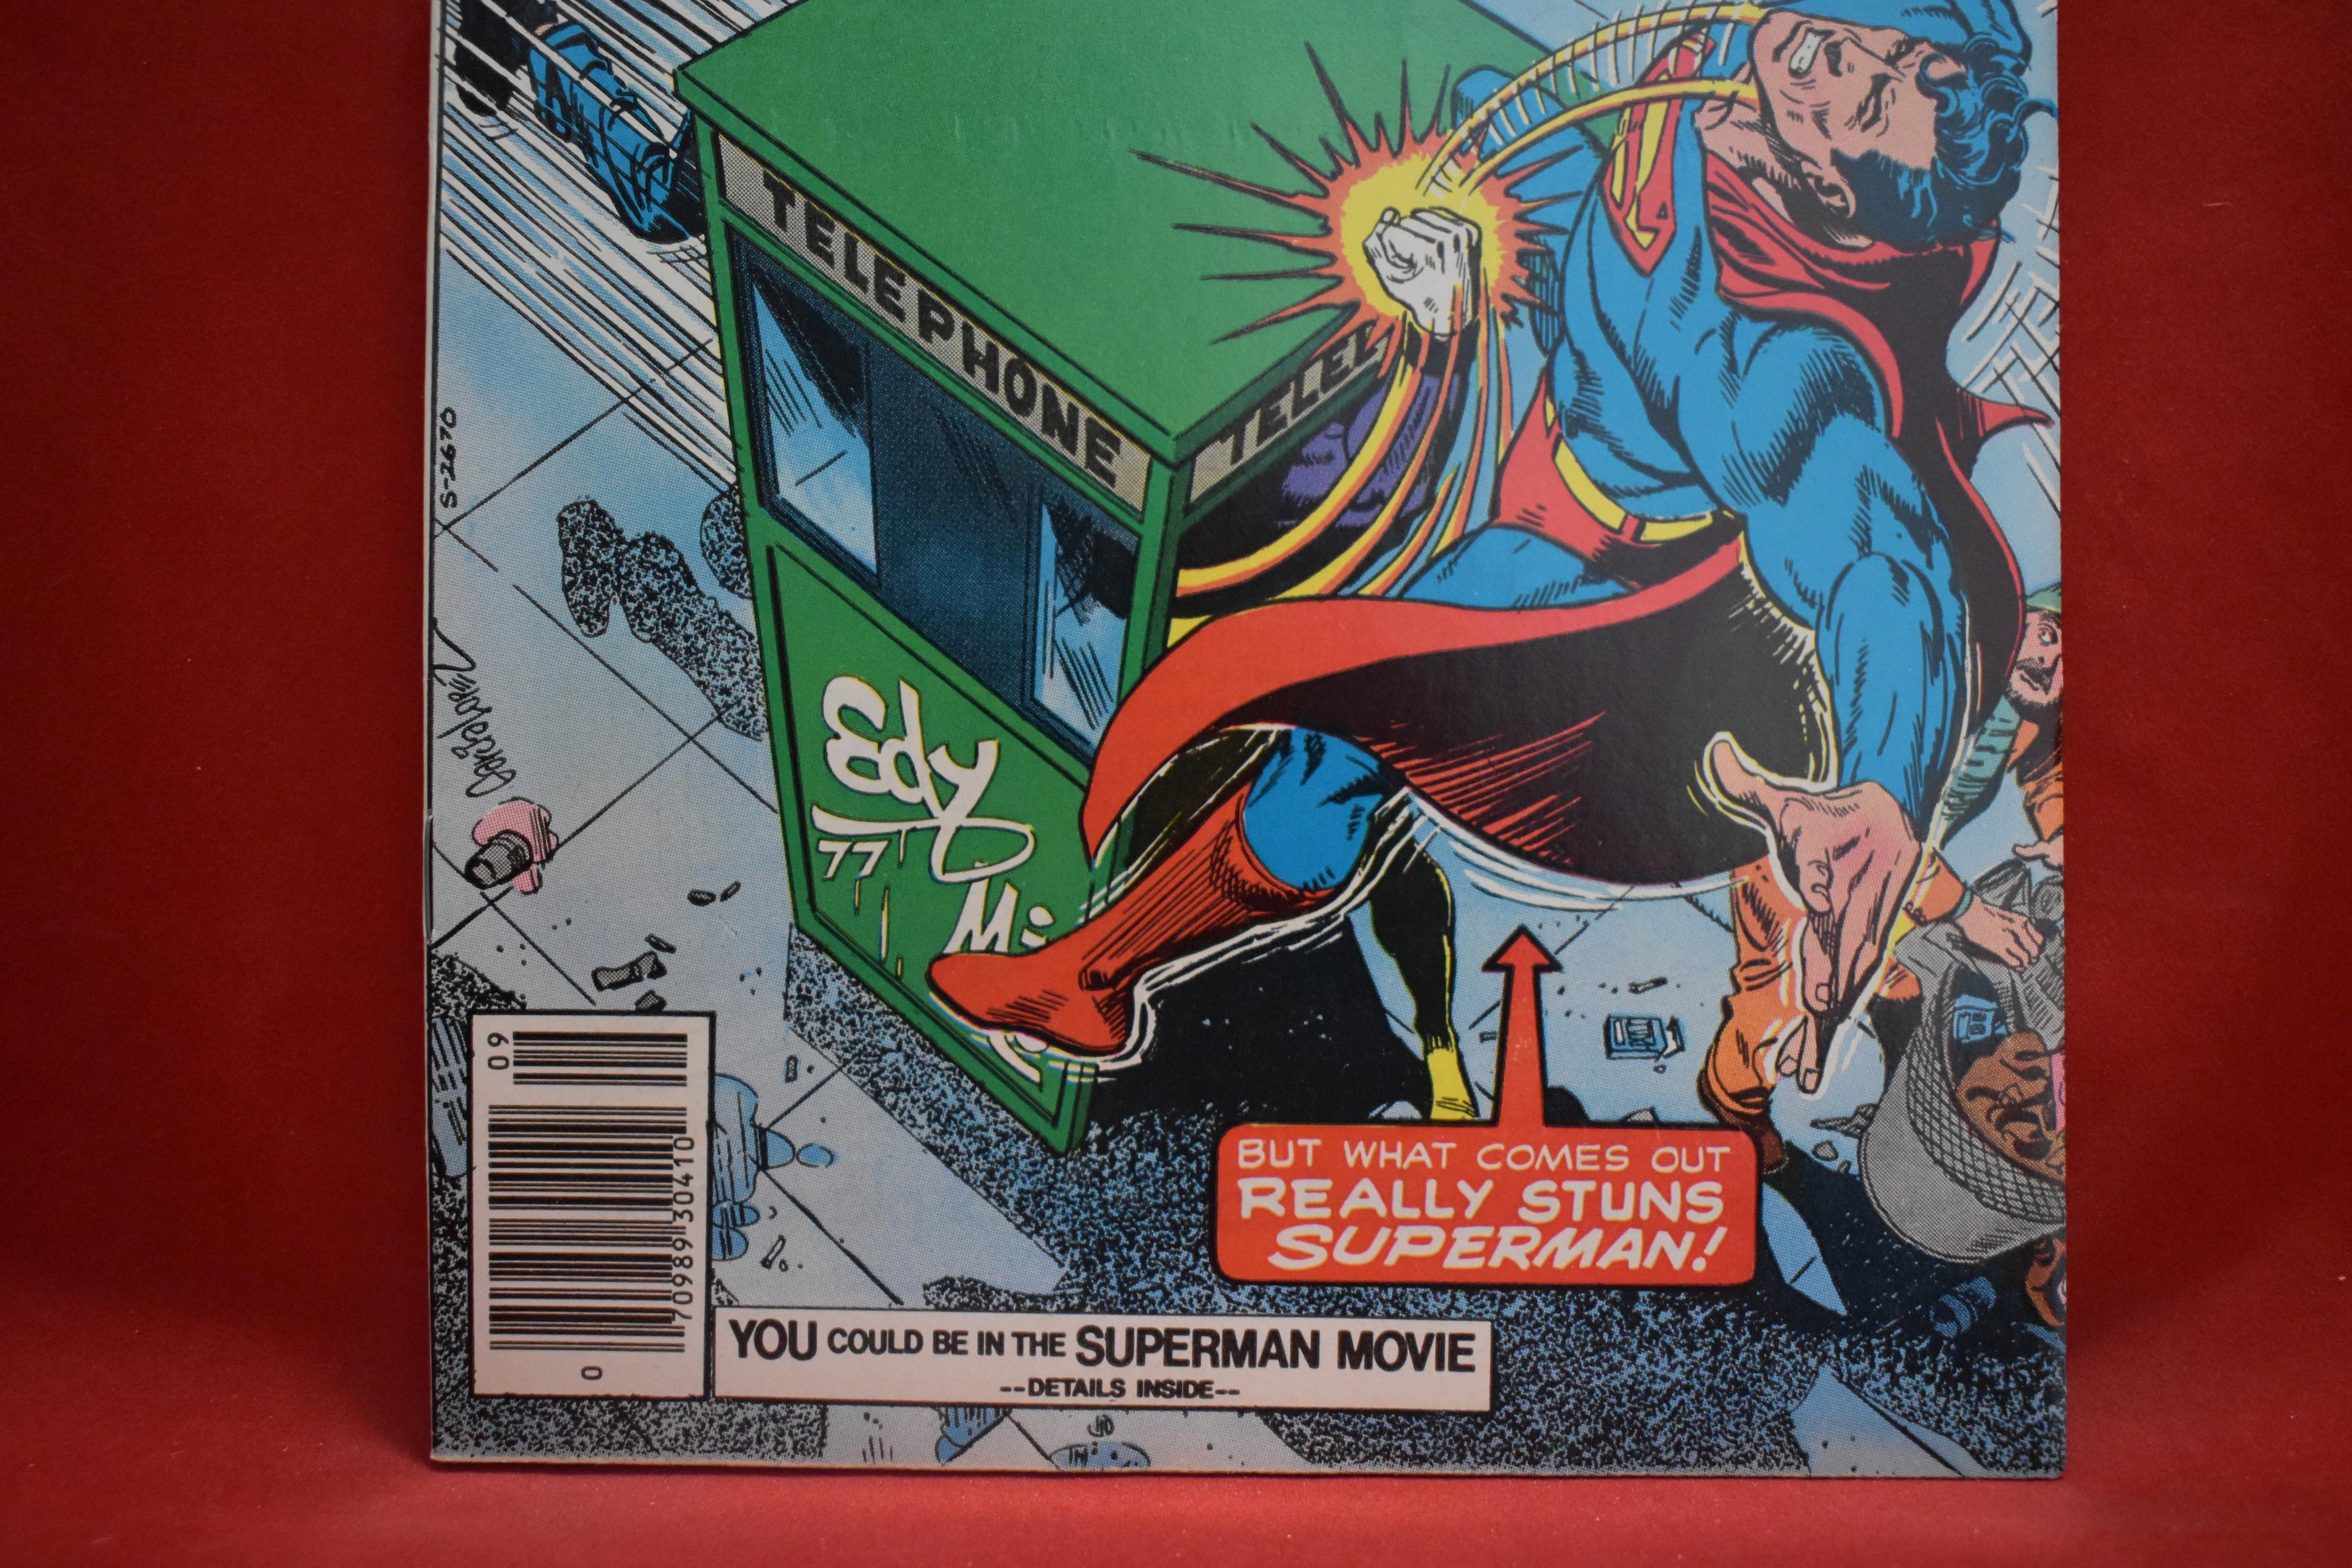 ACTION COMICS #475 | THE SUPER HERO WHO REFUSED TO HANG UP HIS BOOTS | GARCIA-LOPEZ - 1977